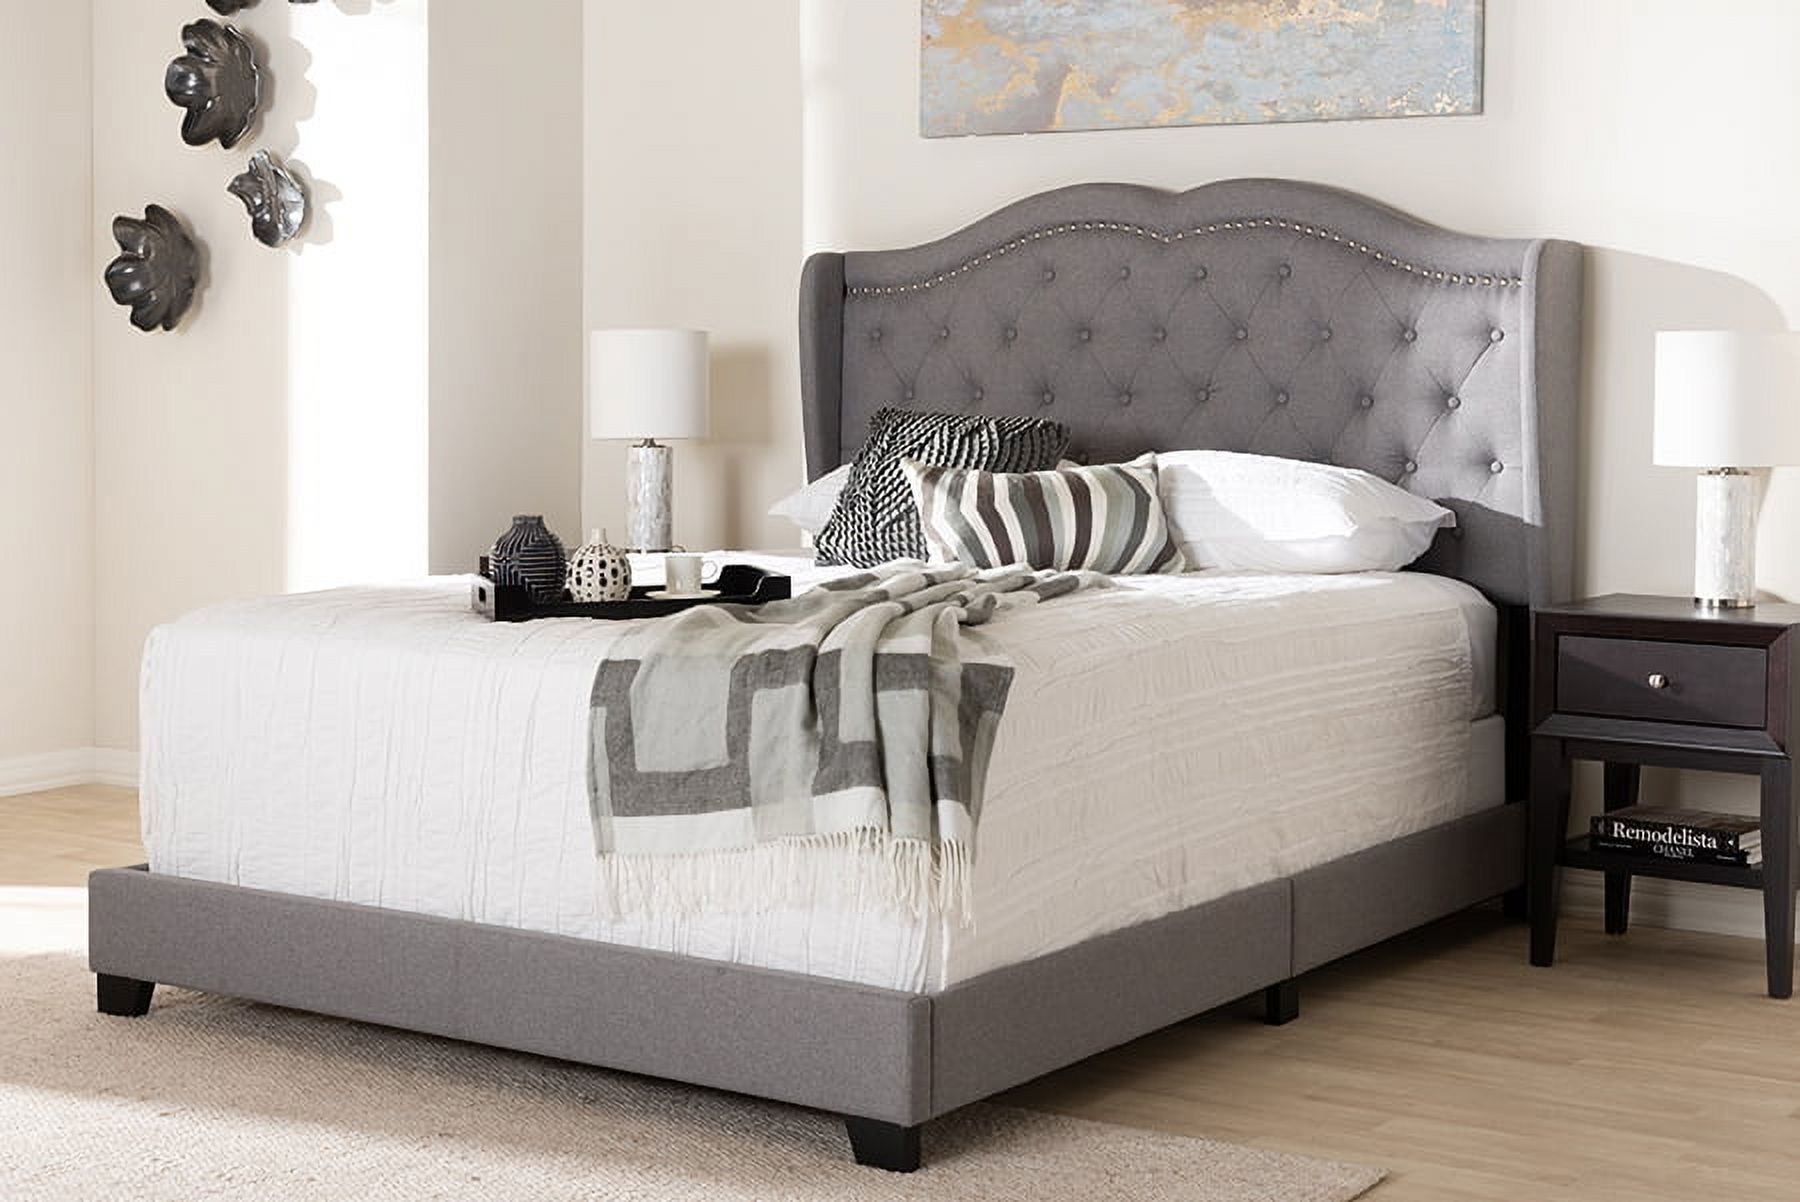 Baxton Studio Aden Modern and Contemporary Grey Fabric Upholstered Full Size Bed - image 1 of 6